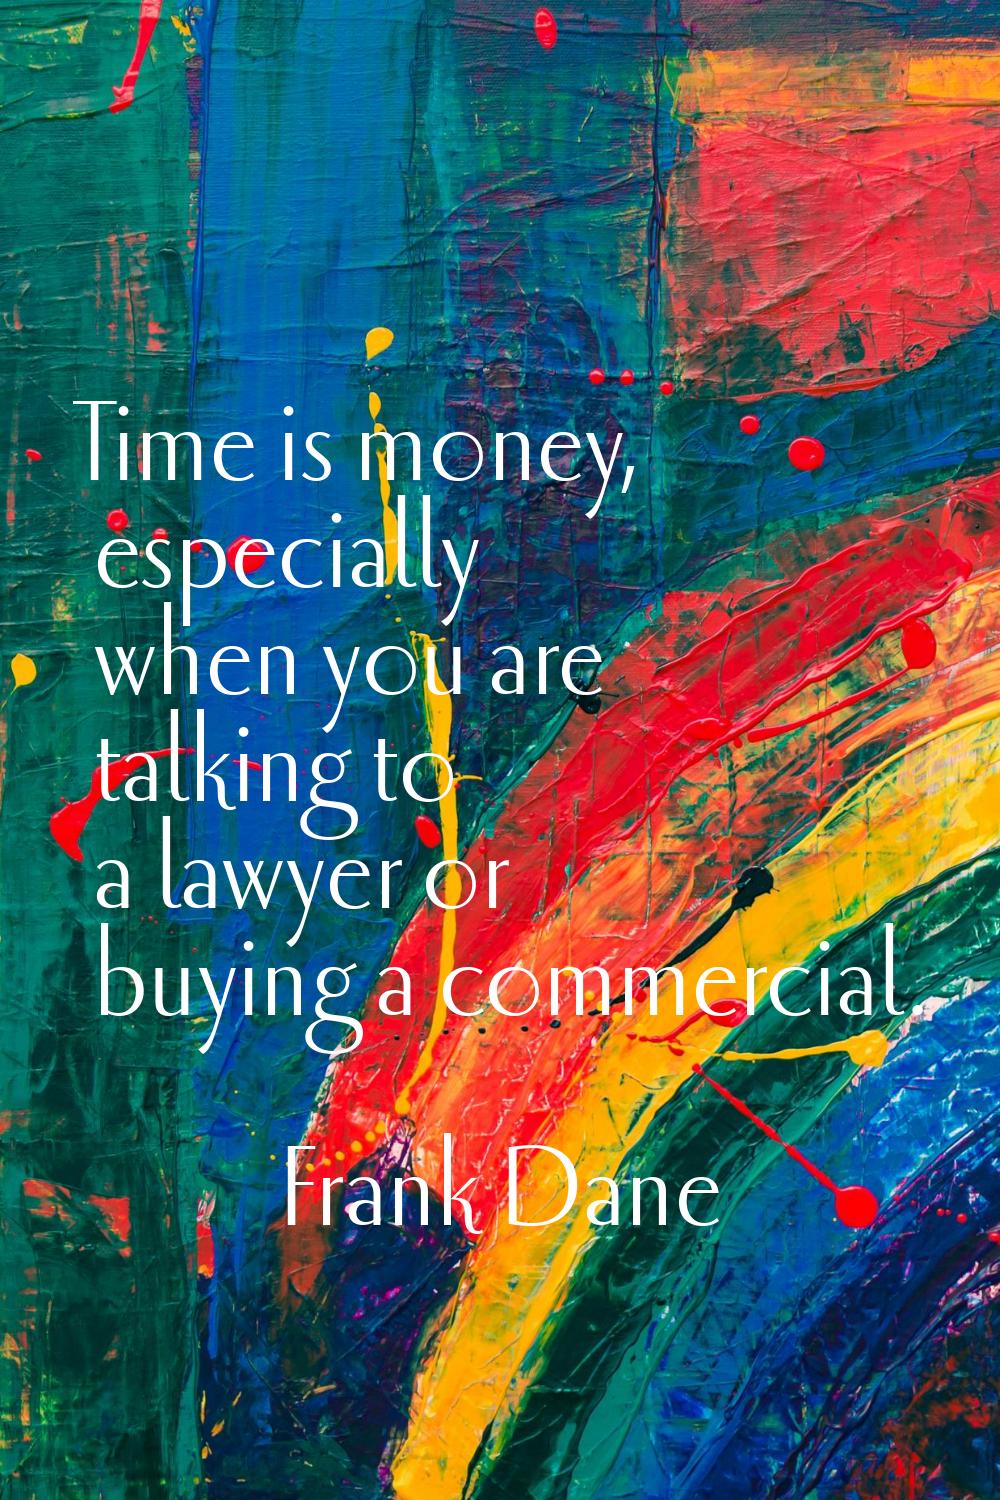 Time is money, especially when you are talking to a lawyer or buying a commercial.